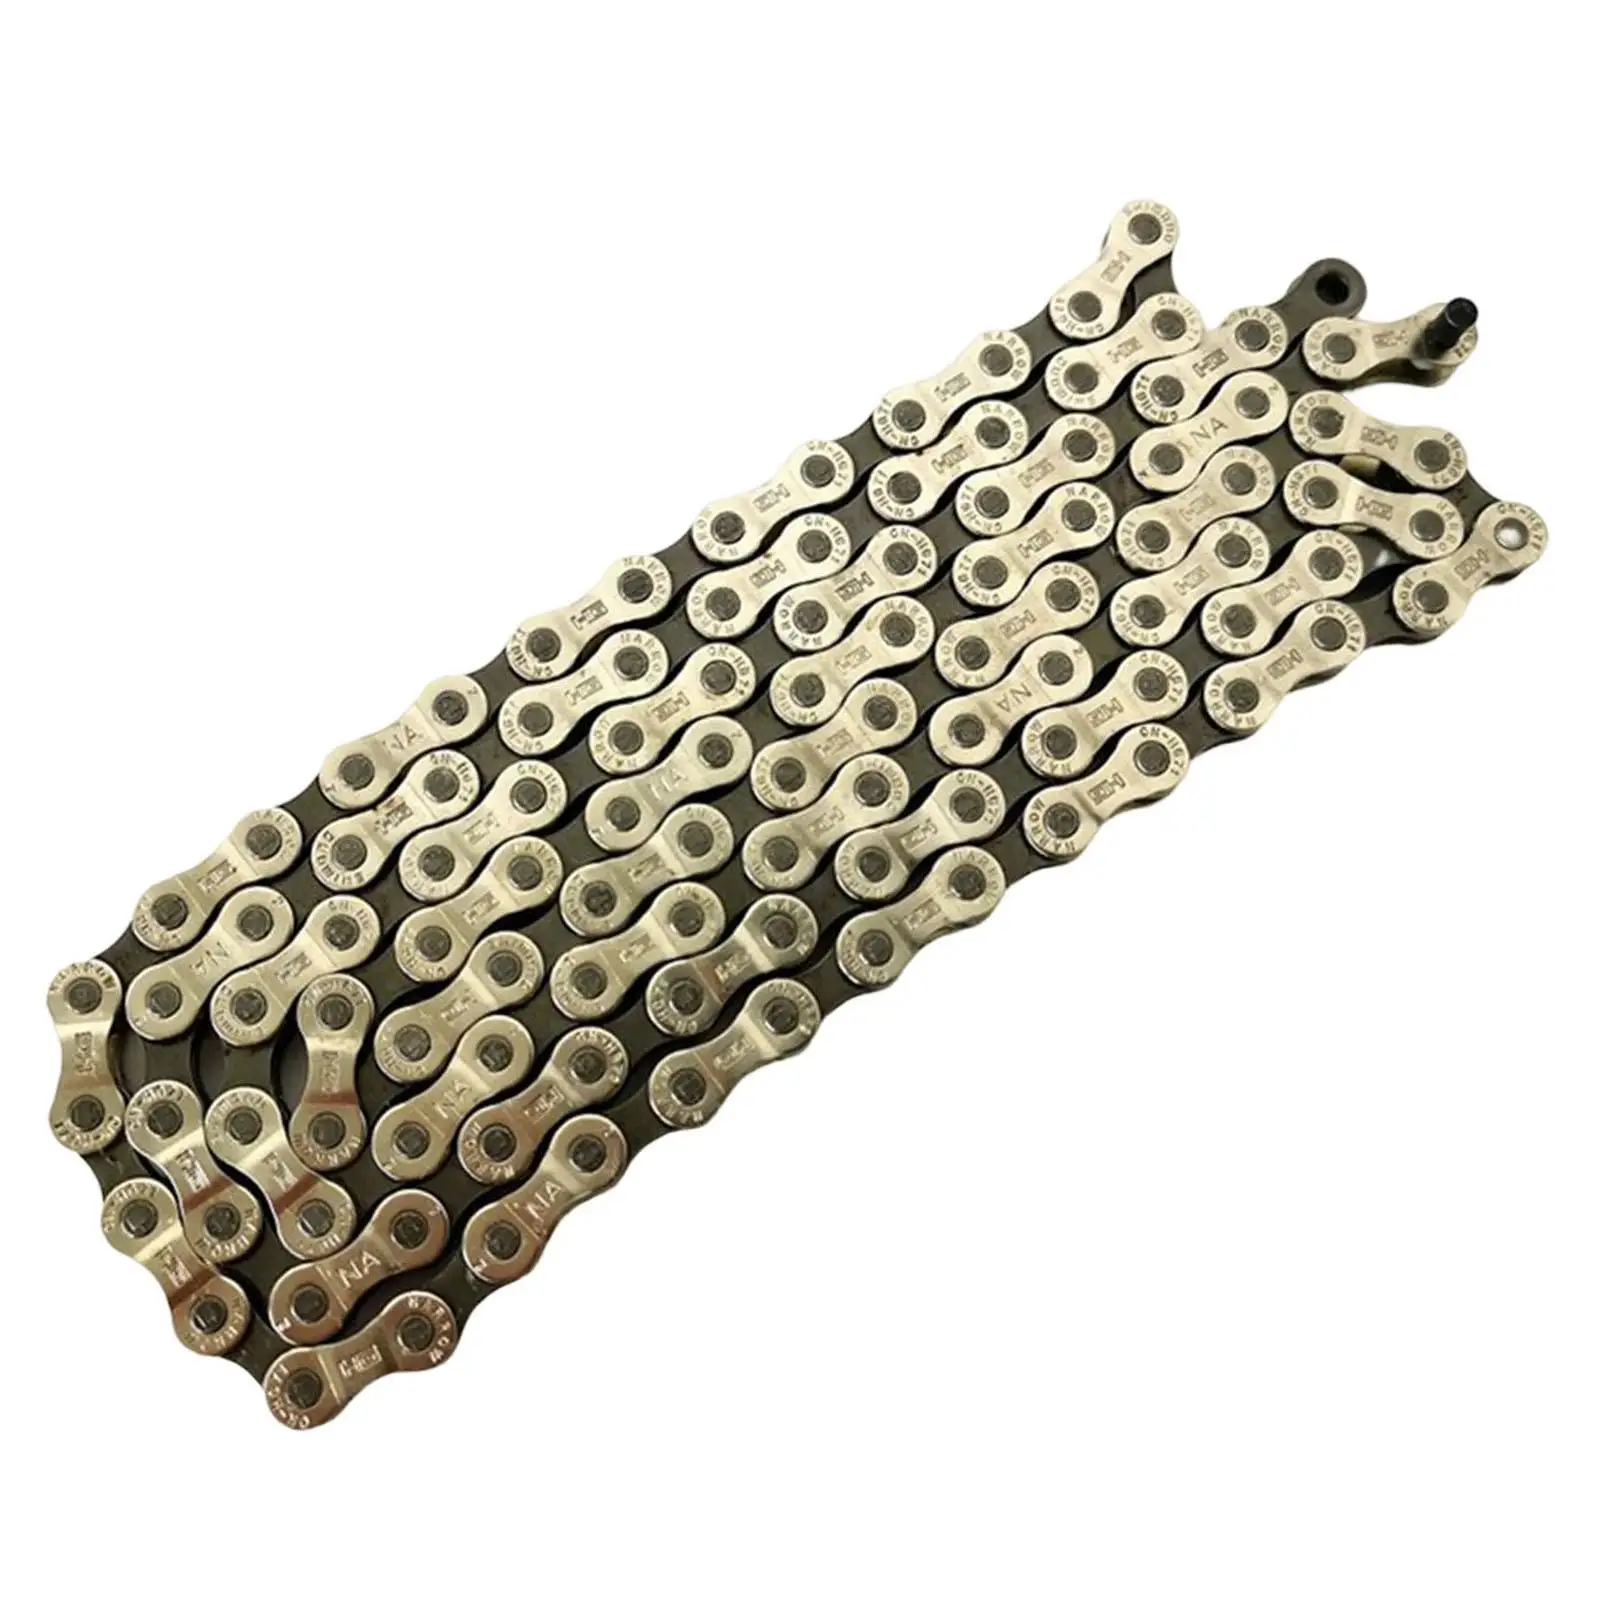 Mountain Road Chain 112L Chain Link Connectors 6/7/8 Speeds Universal